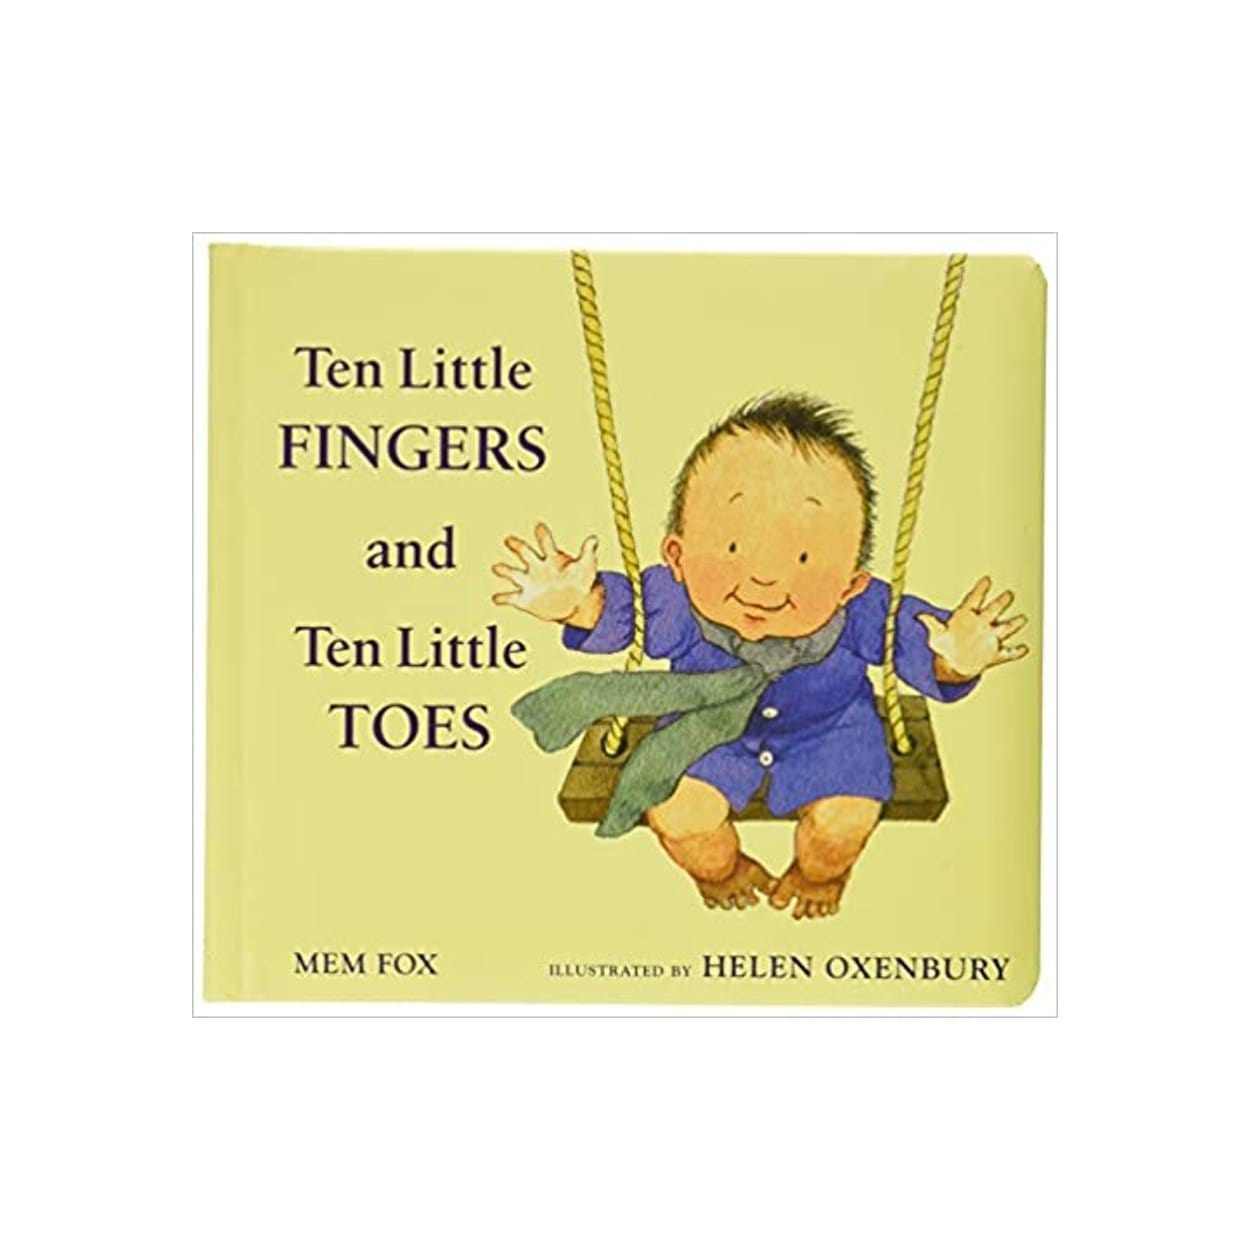 Ten Little Fingers and Ten Little Toes - The Montessori Room, Mem Fox, Toronto, Ontario, Canada, bestselling children's books, board books, children's books about human similarities, baby's first book